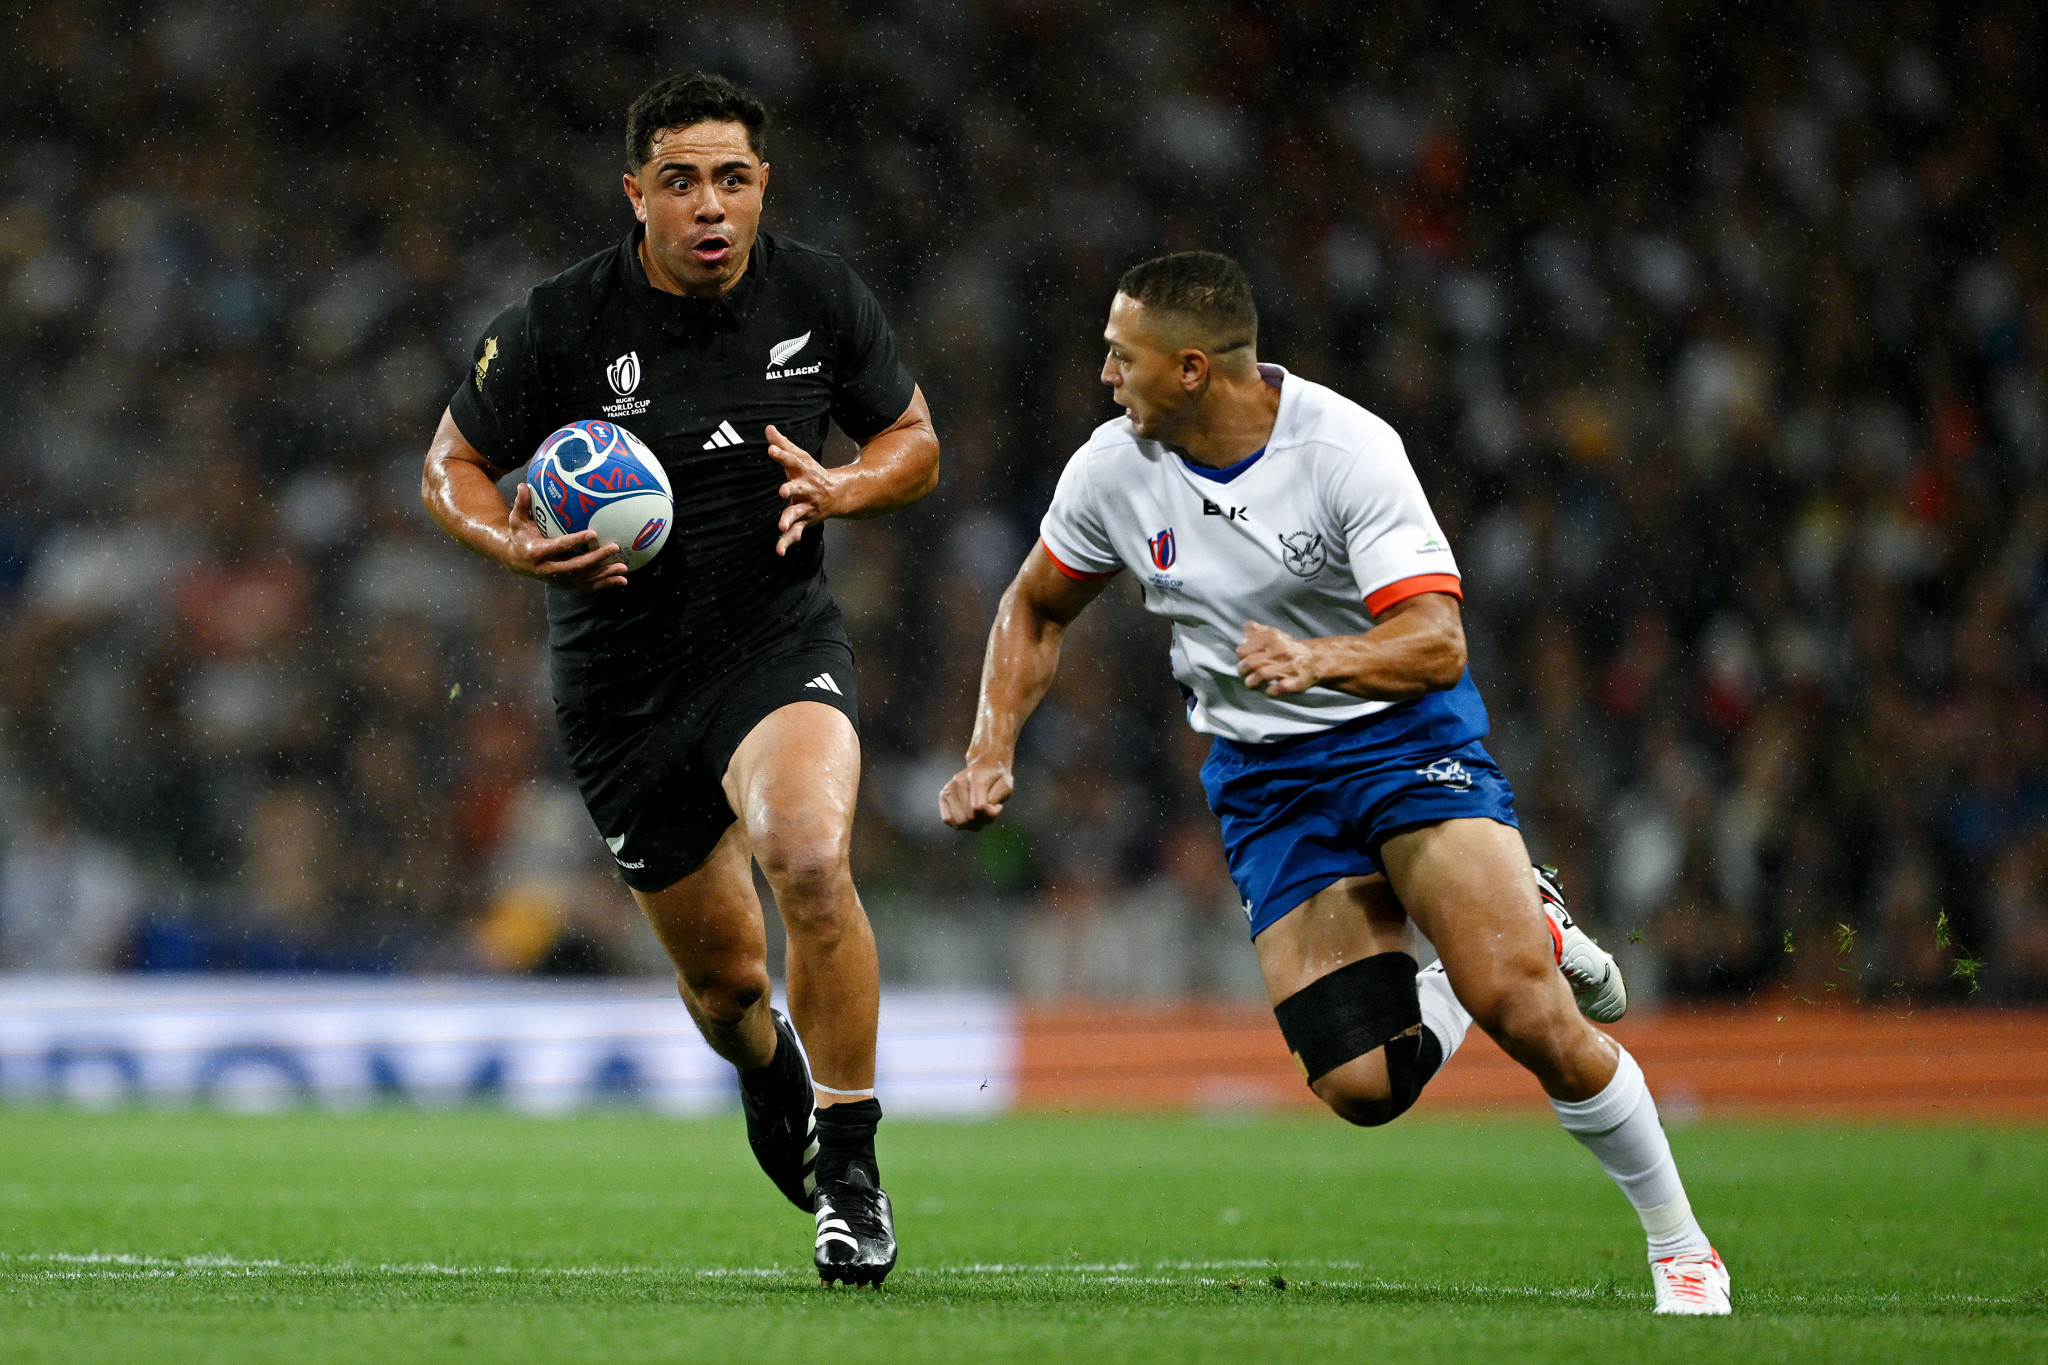 Anton Lienert-Brown, left, was part of the group of players who scored tries for New Zealand today ©Getty Images